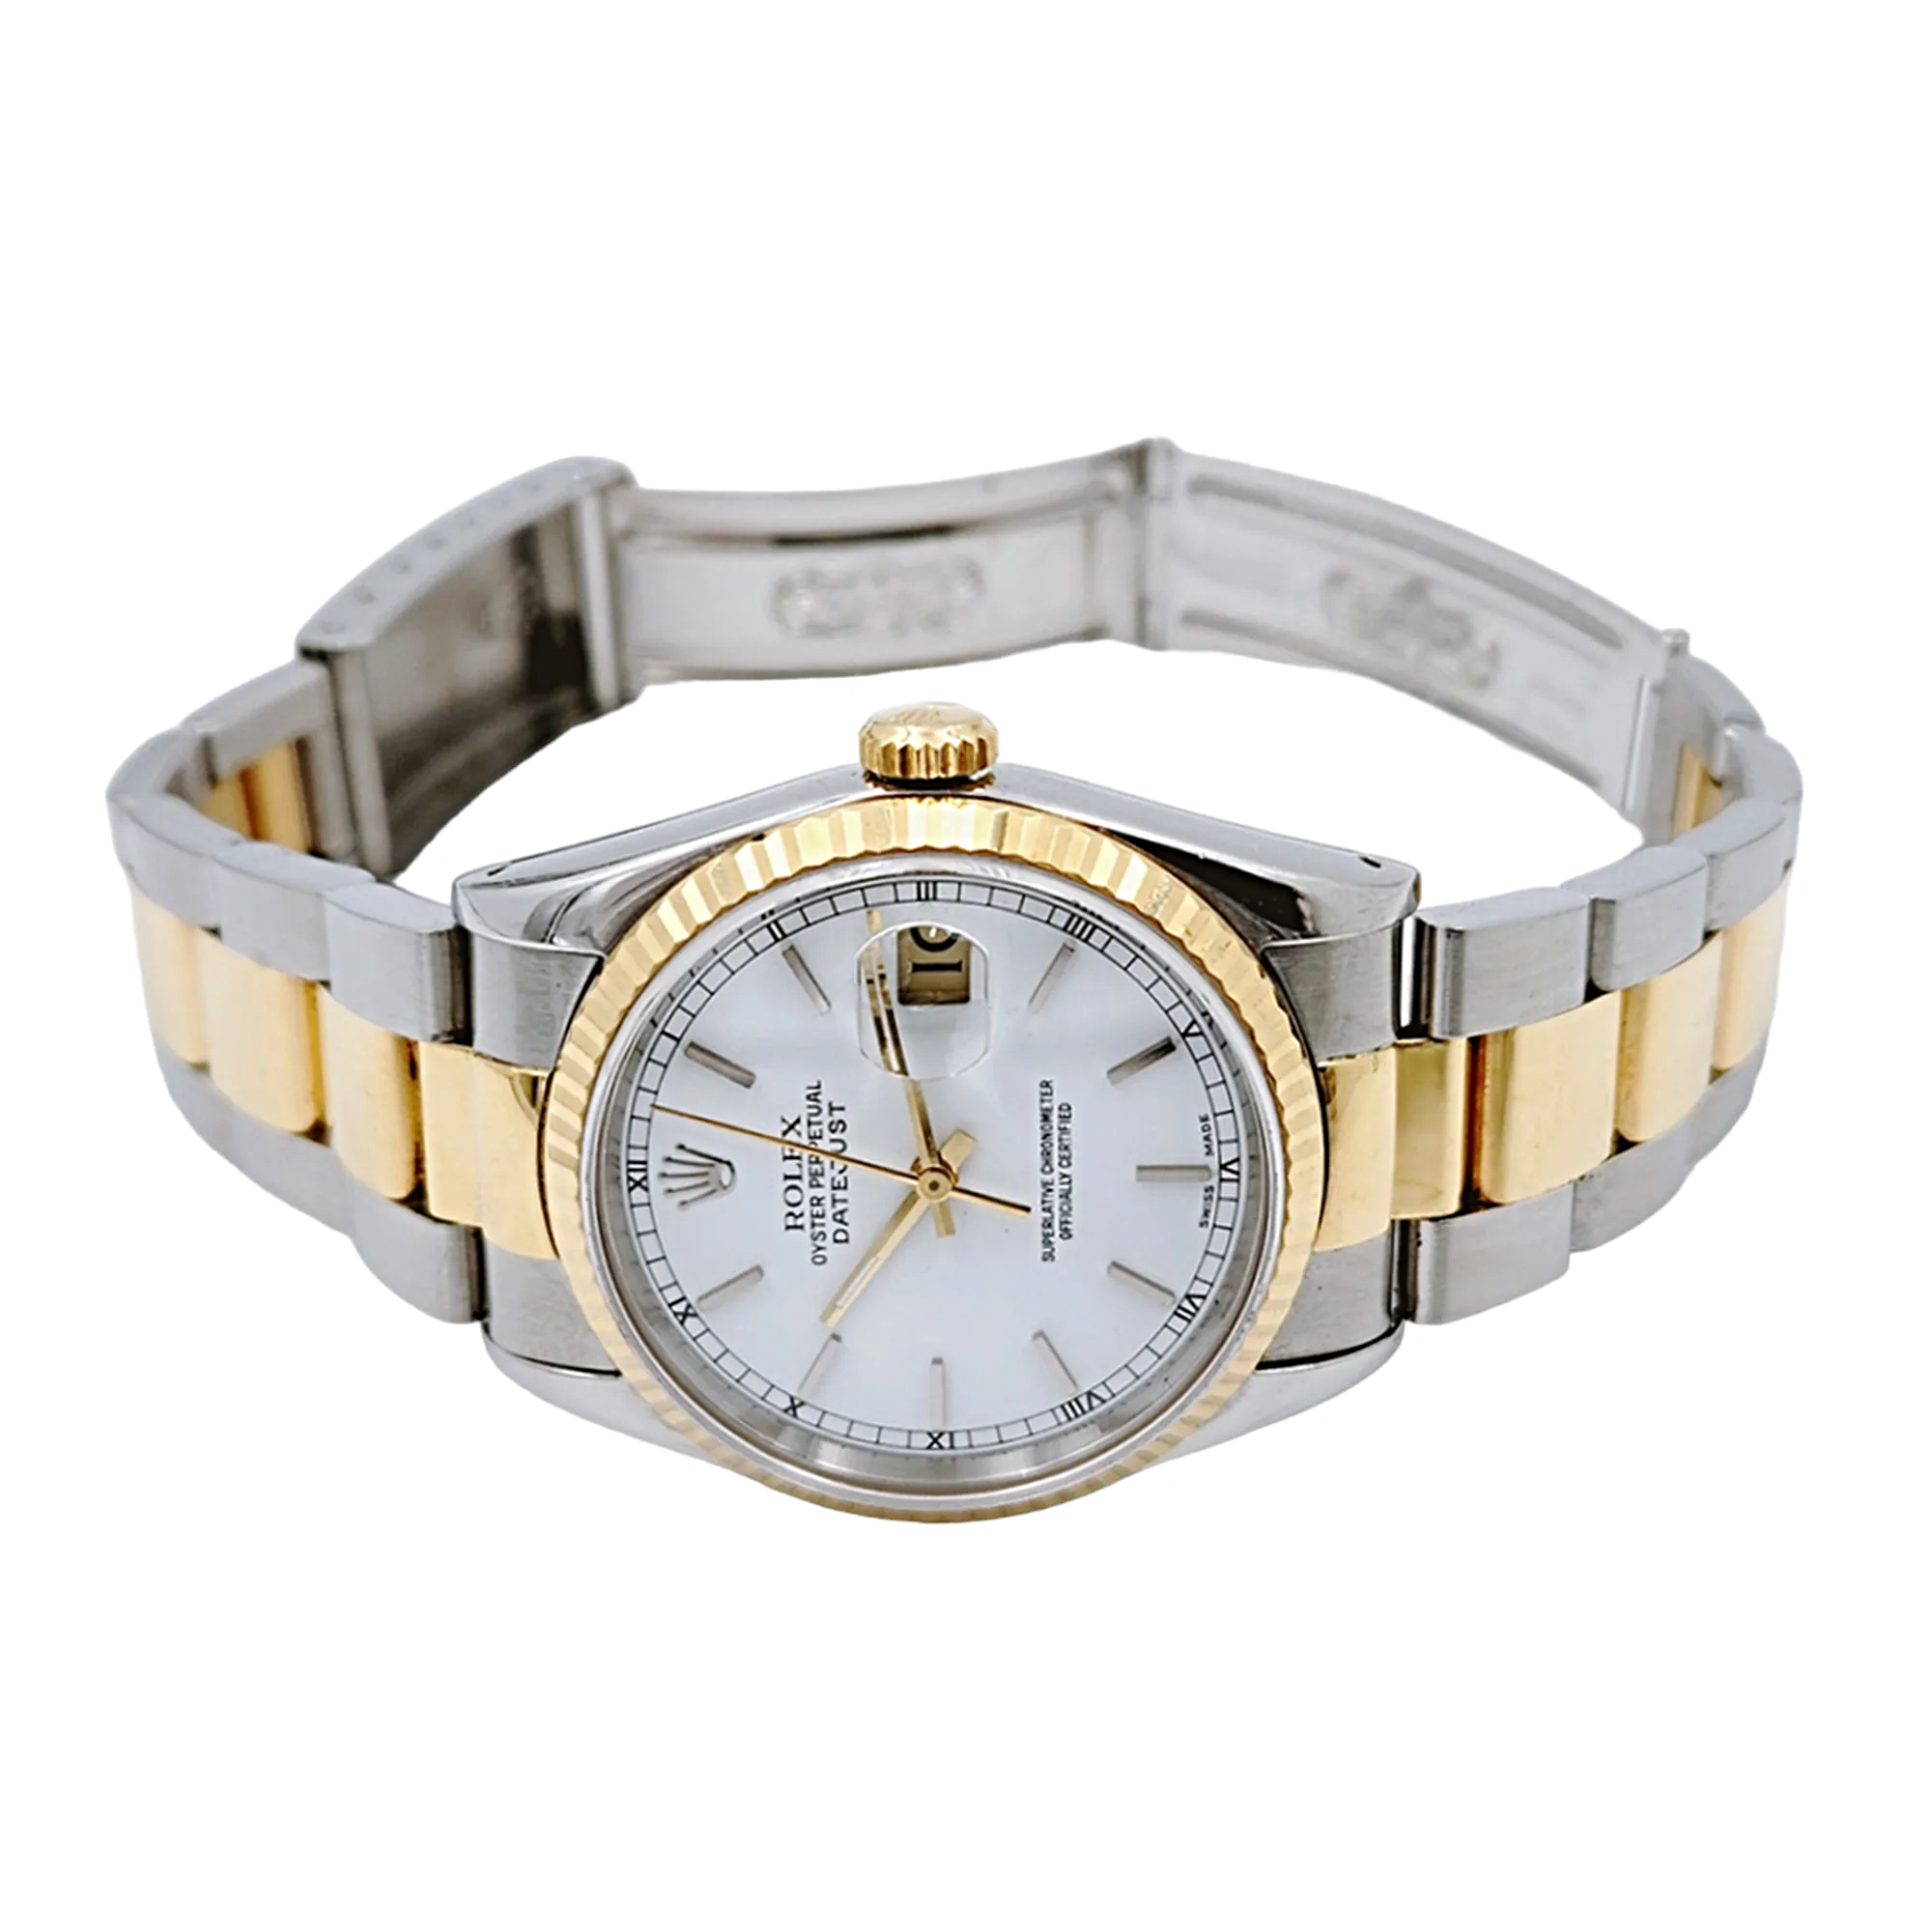 Men's Rolex 36mm DateJust 18K Yellow Gold / Stainless Steel Two Tone Watch with White Dial and Fluted Bezel. (Pre-Owned 16263)